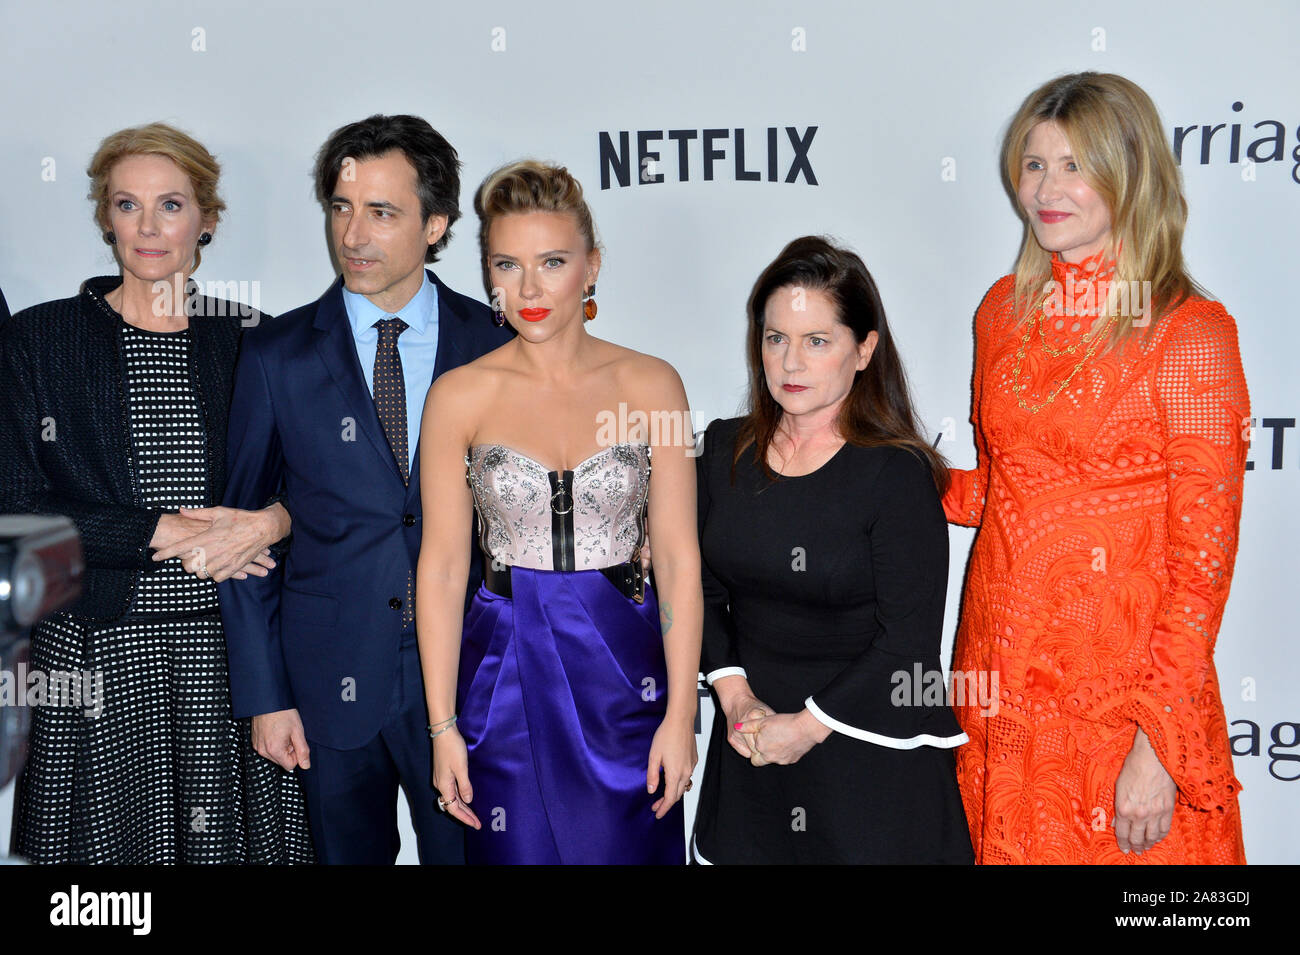 Los Angeles, USA. 06th Nov, 2019. LOS ANGELES, USA. November 06, 2019: Julie Hagerty, Noah Baumbach, Scarlett Johansson, Martha Kelly & Laura Dern at the premiere for 'Marriage Story' at the DGA Theatre. Picture Credit: Paul Smith/Alamy Live News Stock Photo